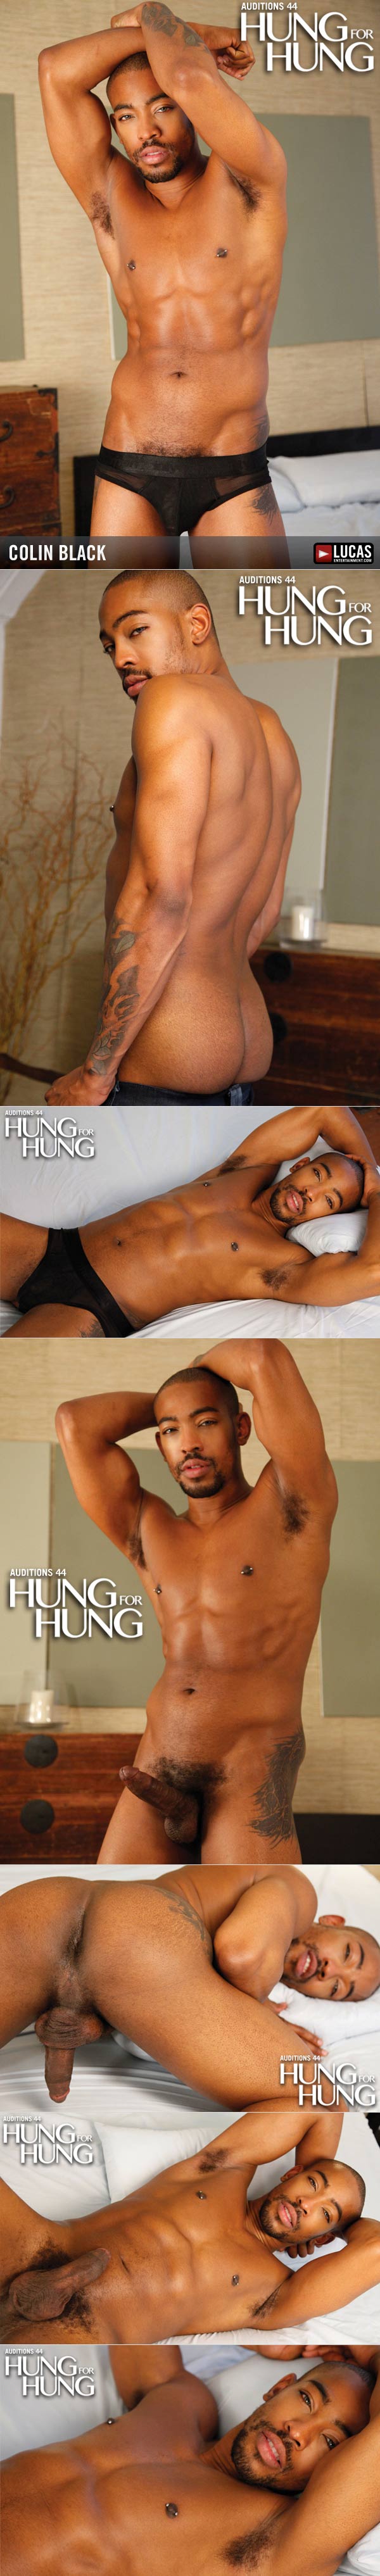 Hung for Hung (Colin Black & Dominic Pacifico)(Flip-Fuck) at LucasEntertainment.com